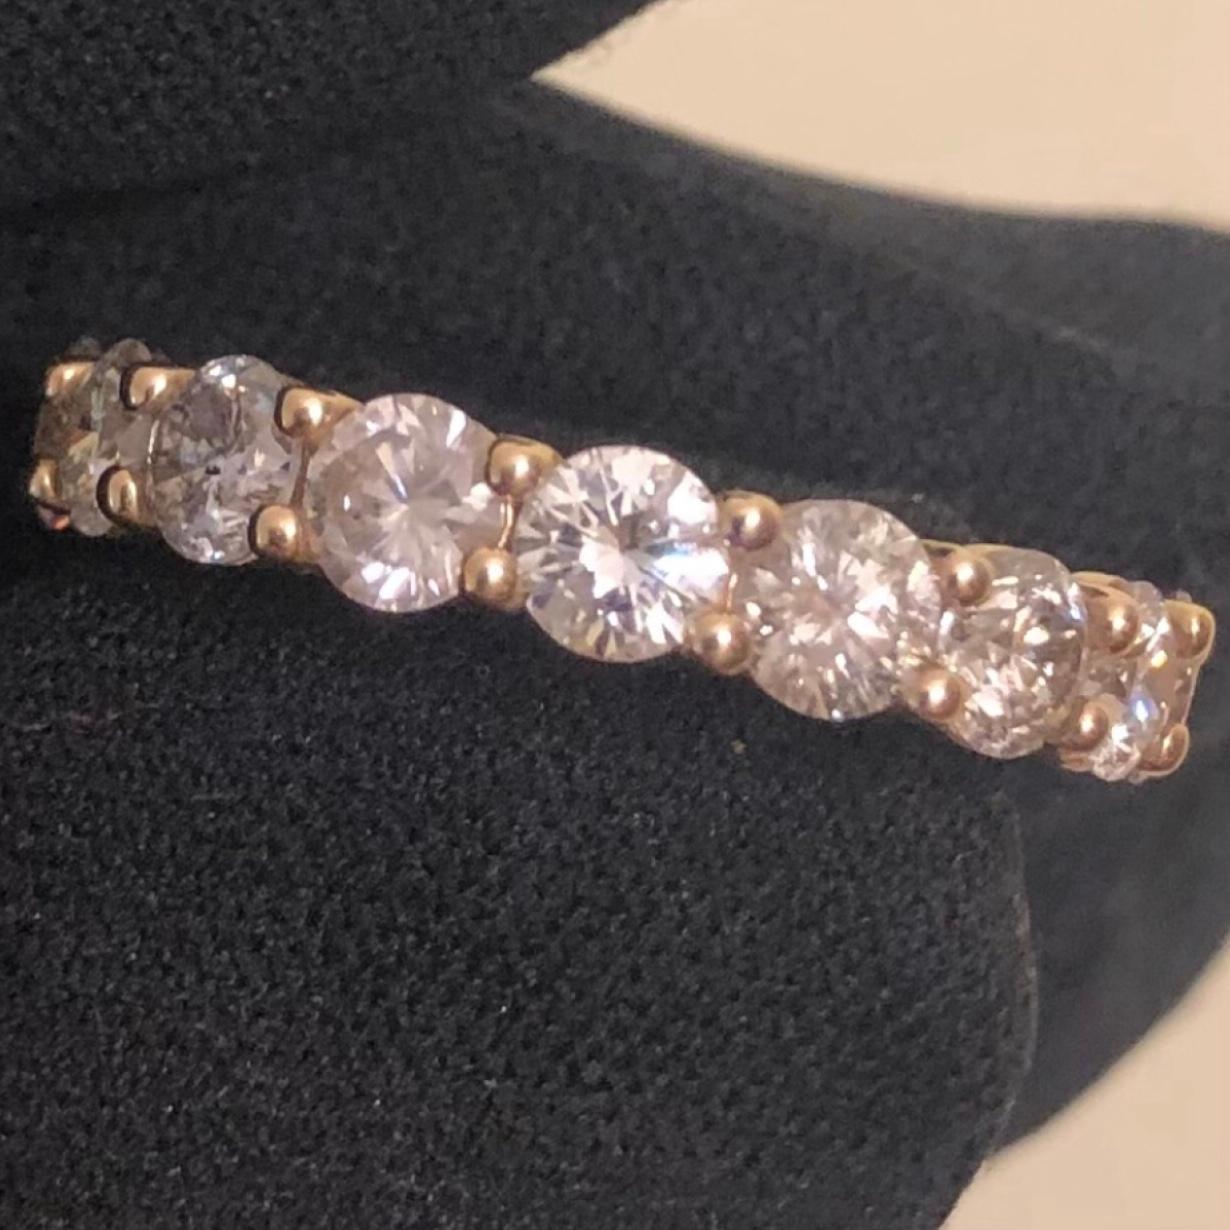 Stunning 3 1/2 carat round diamond full eternity band ring in 14k yellow gold. 17 round SI-I clarity solitaire diamonds are hand set in this full eternity band weighing approx. 3.53 carats.


17 natural 1/5 carat solitaire earth-mined diamonds are